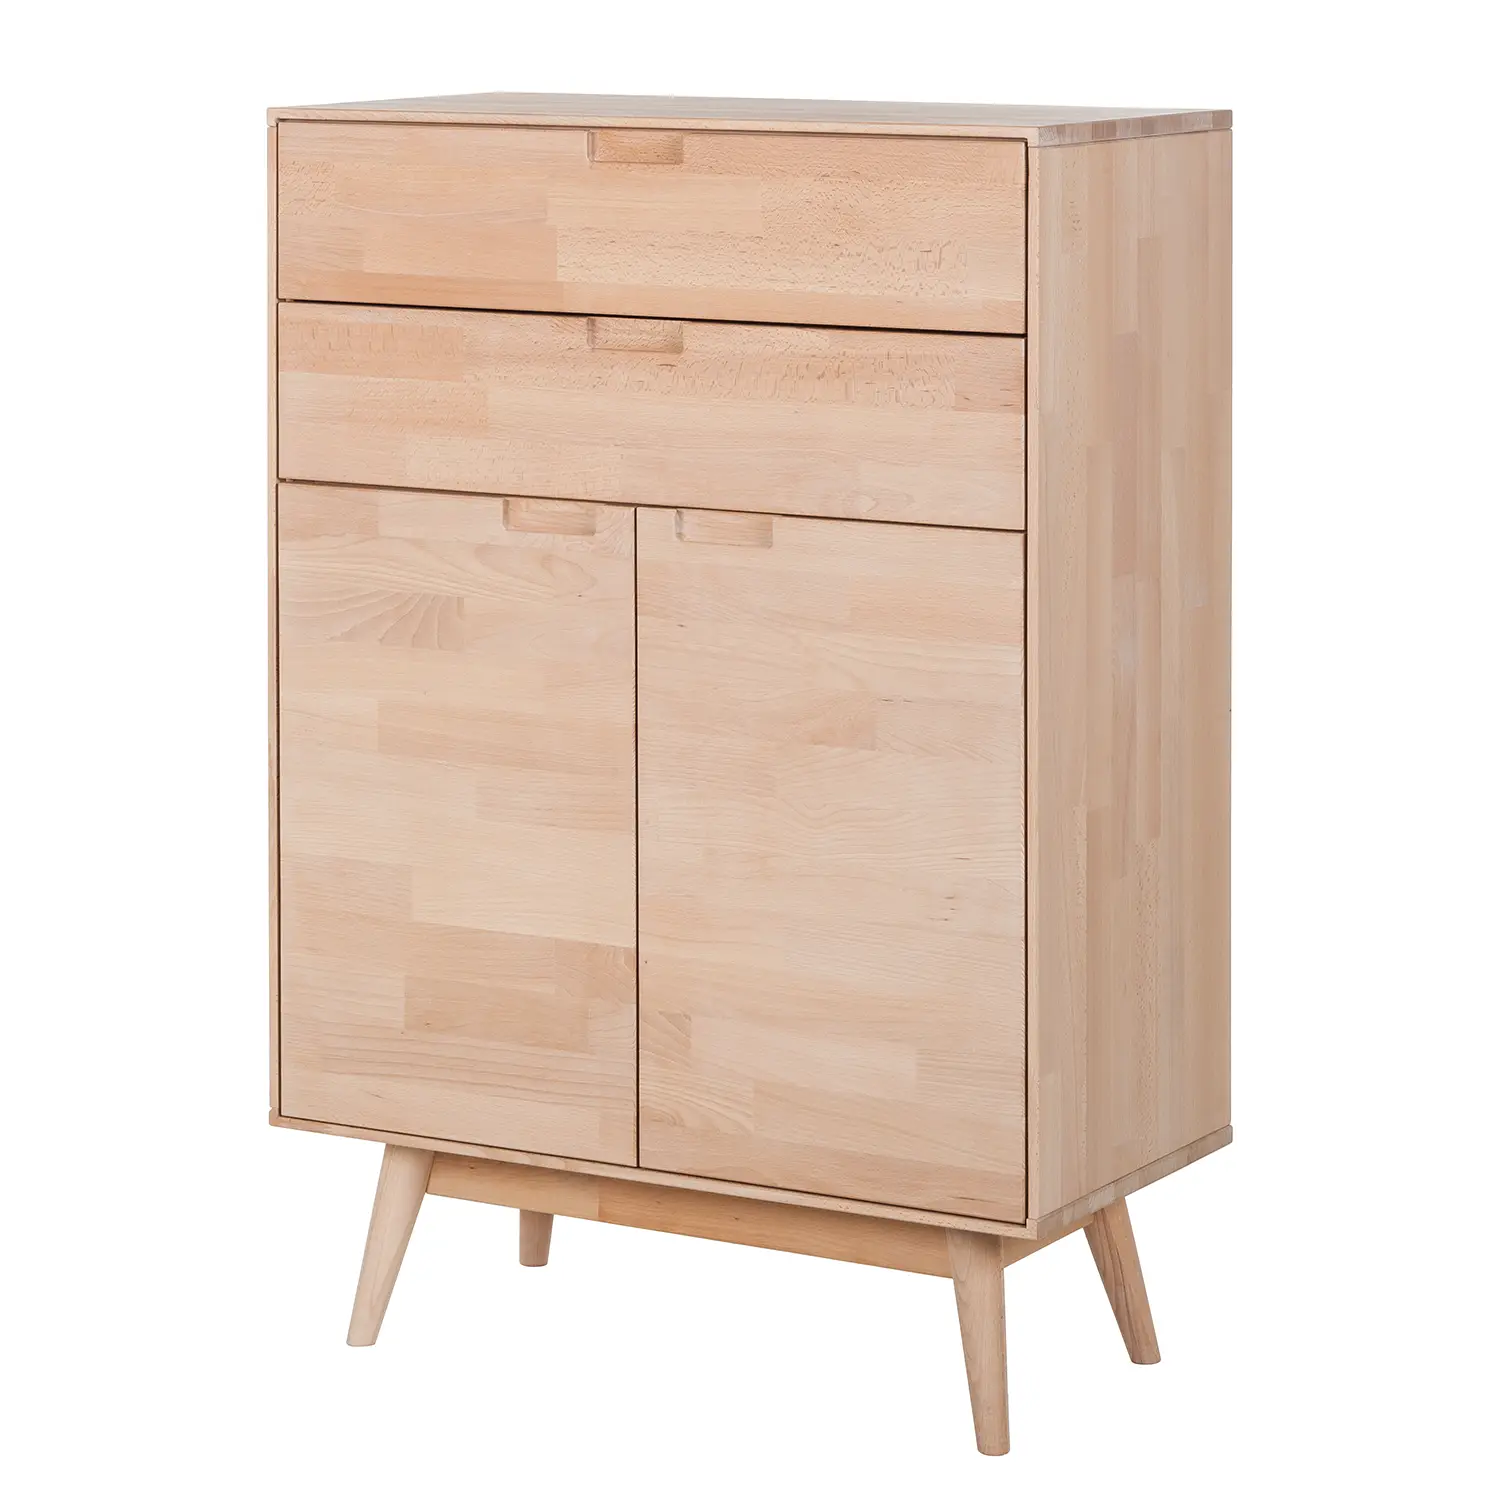 FINSBY Highboard